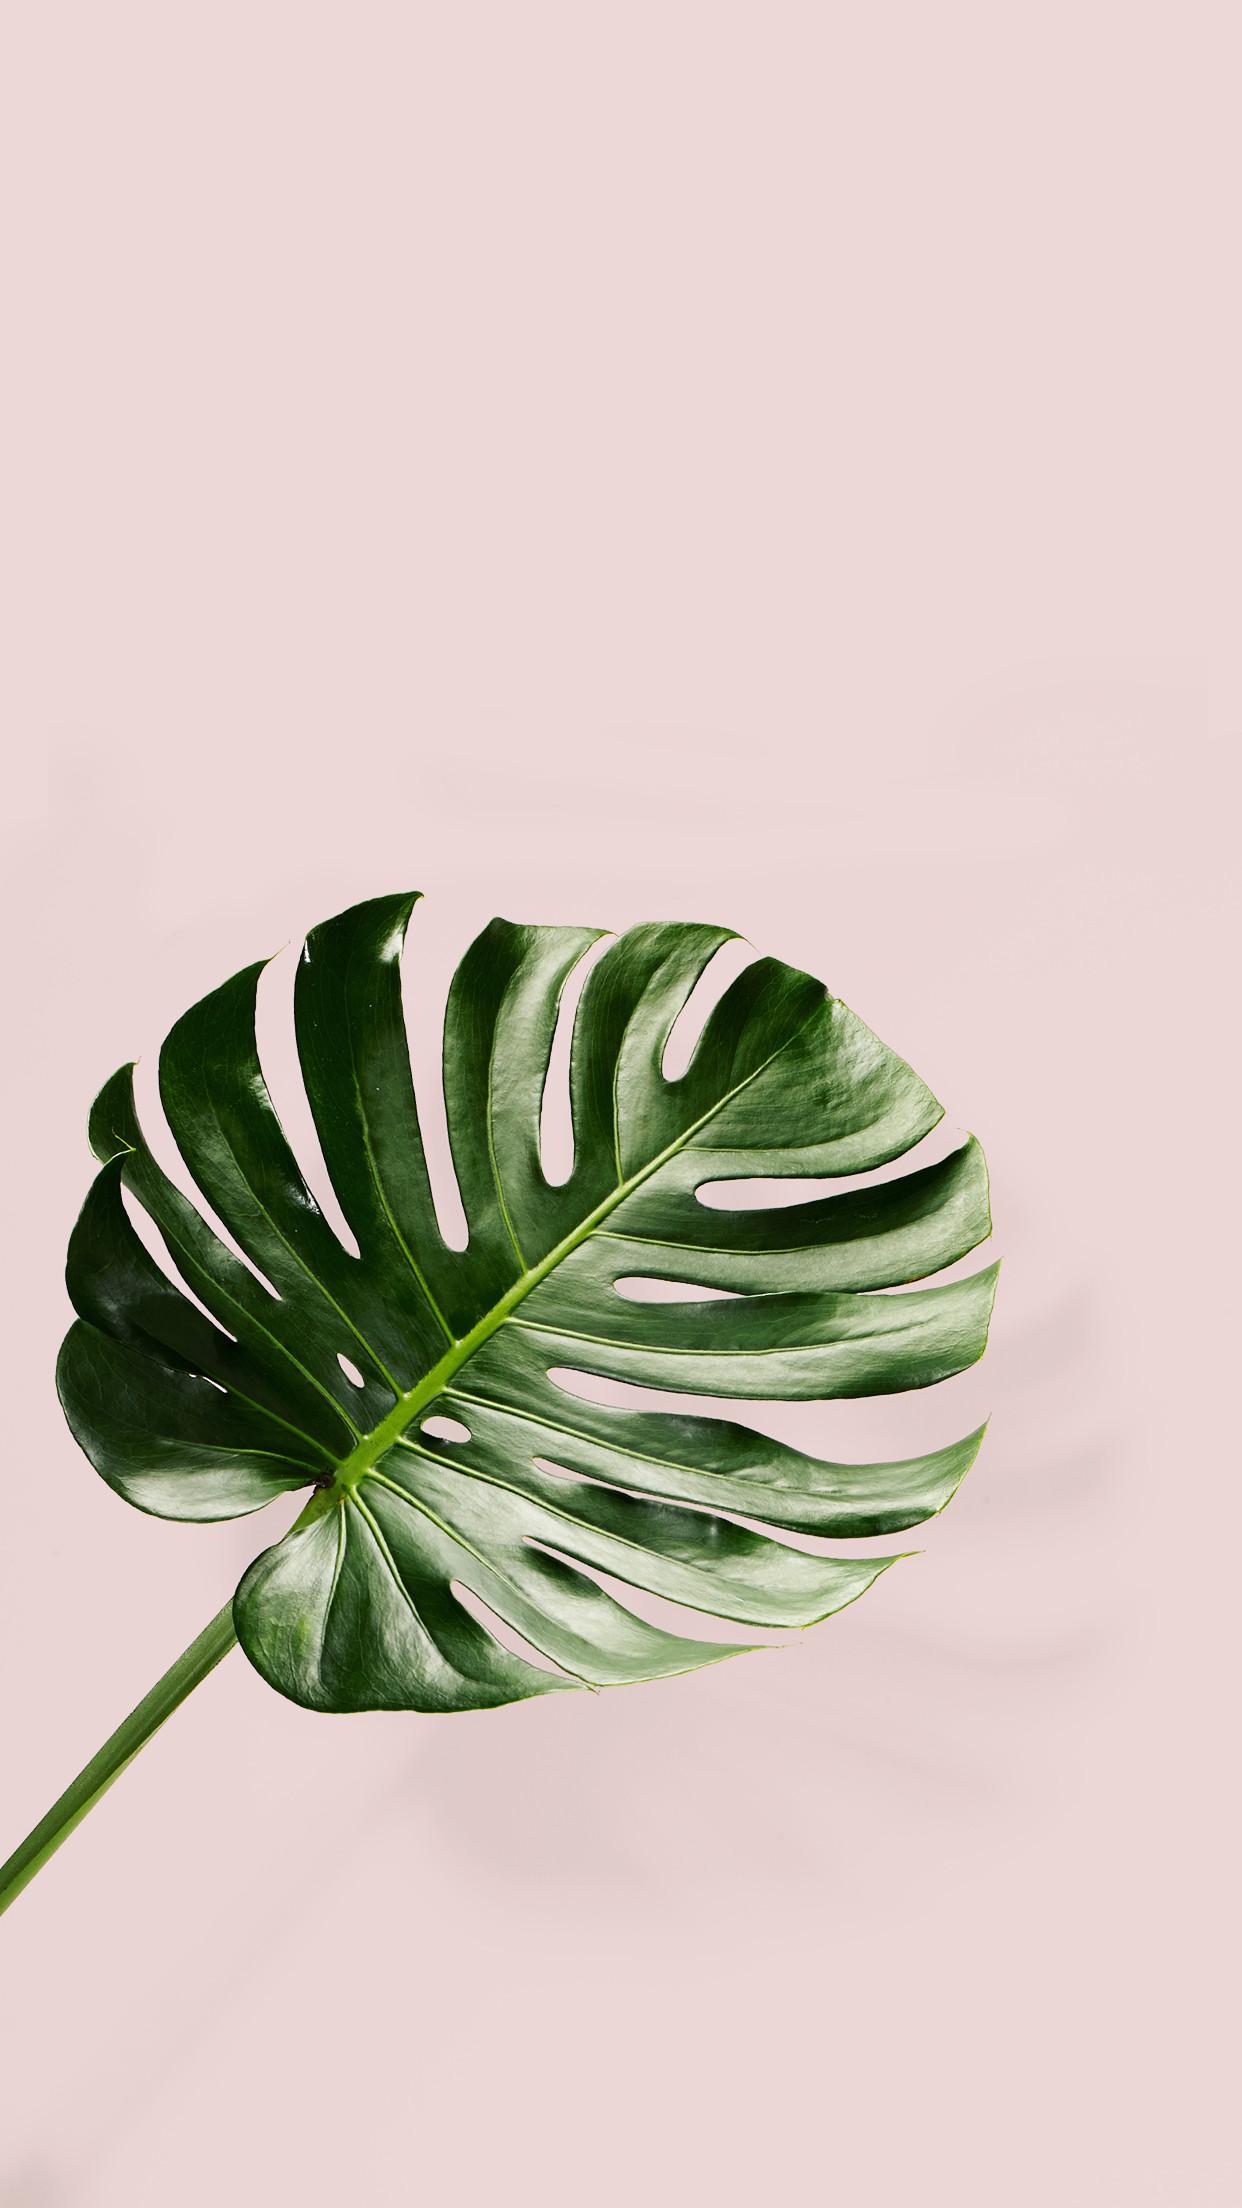 Aesthetic Green Leaves Pink Background - pic-corn